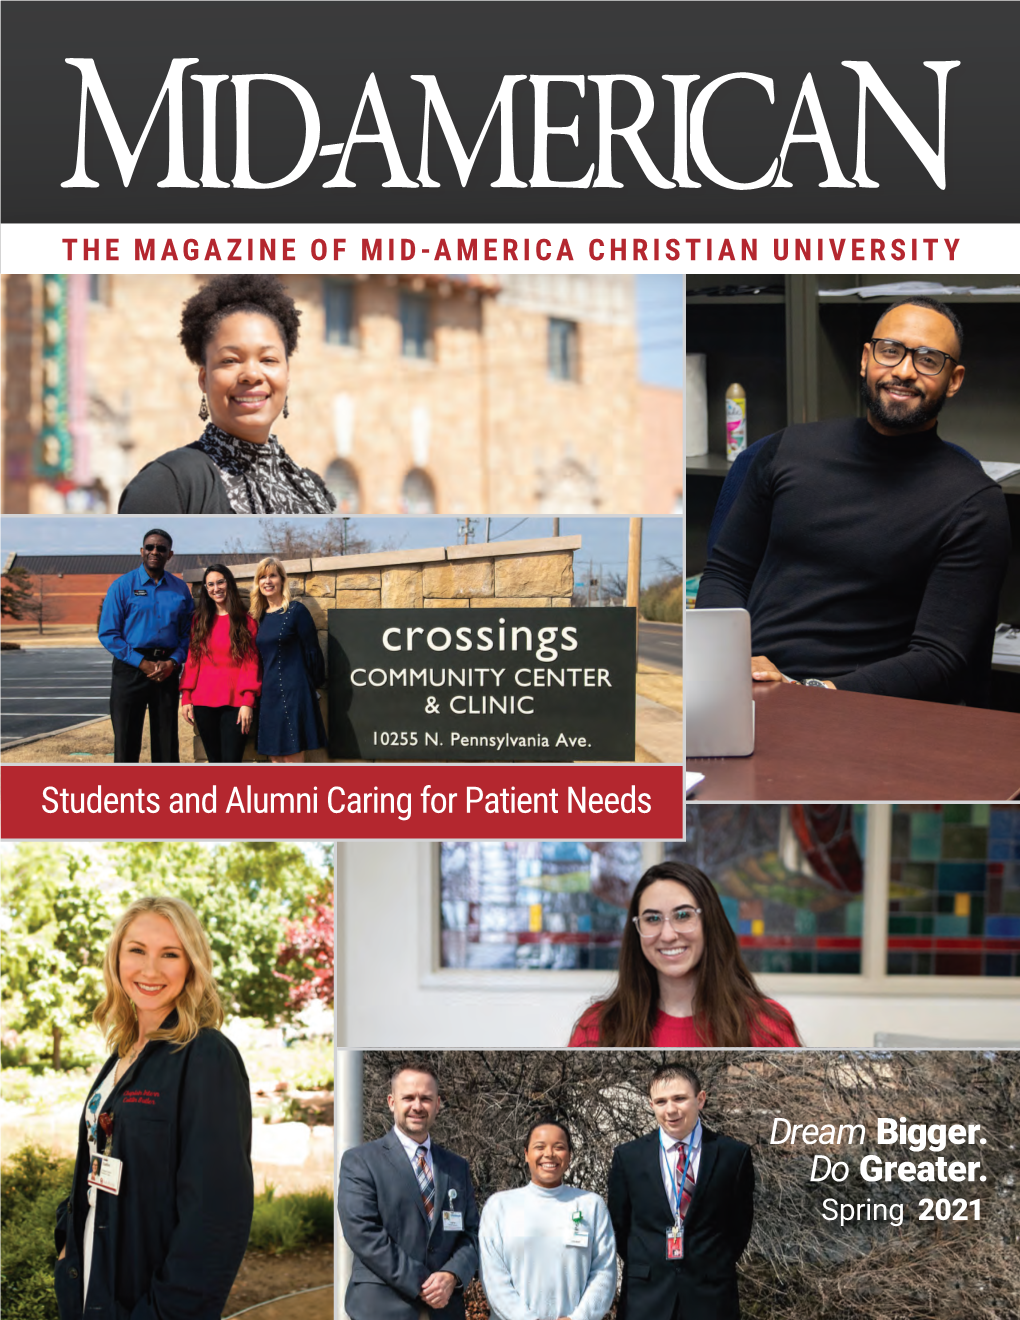 Students and Alumni Caring for Patient Needs